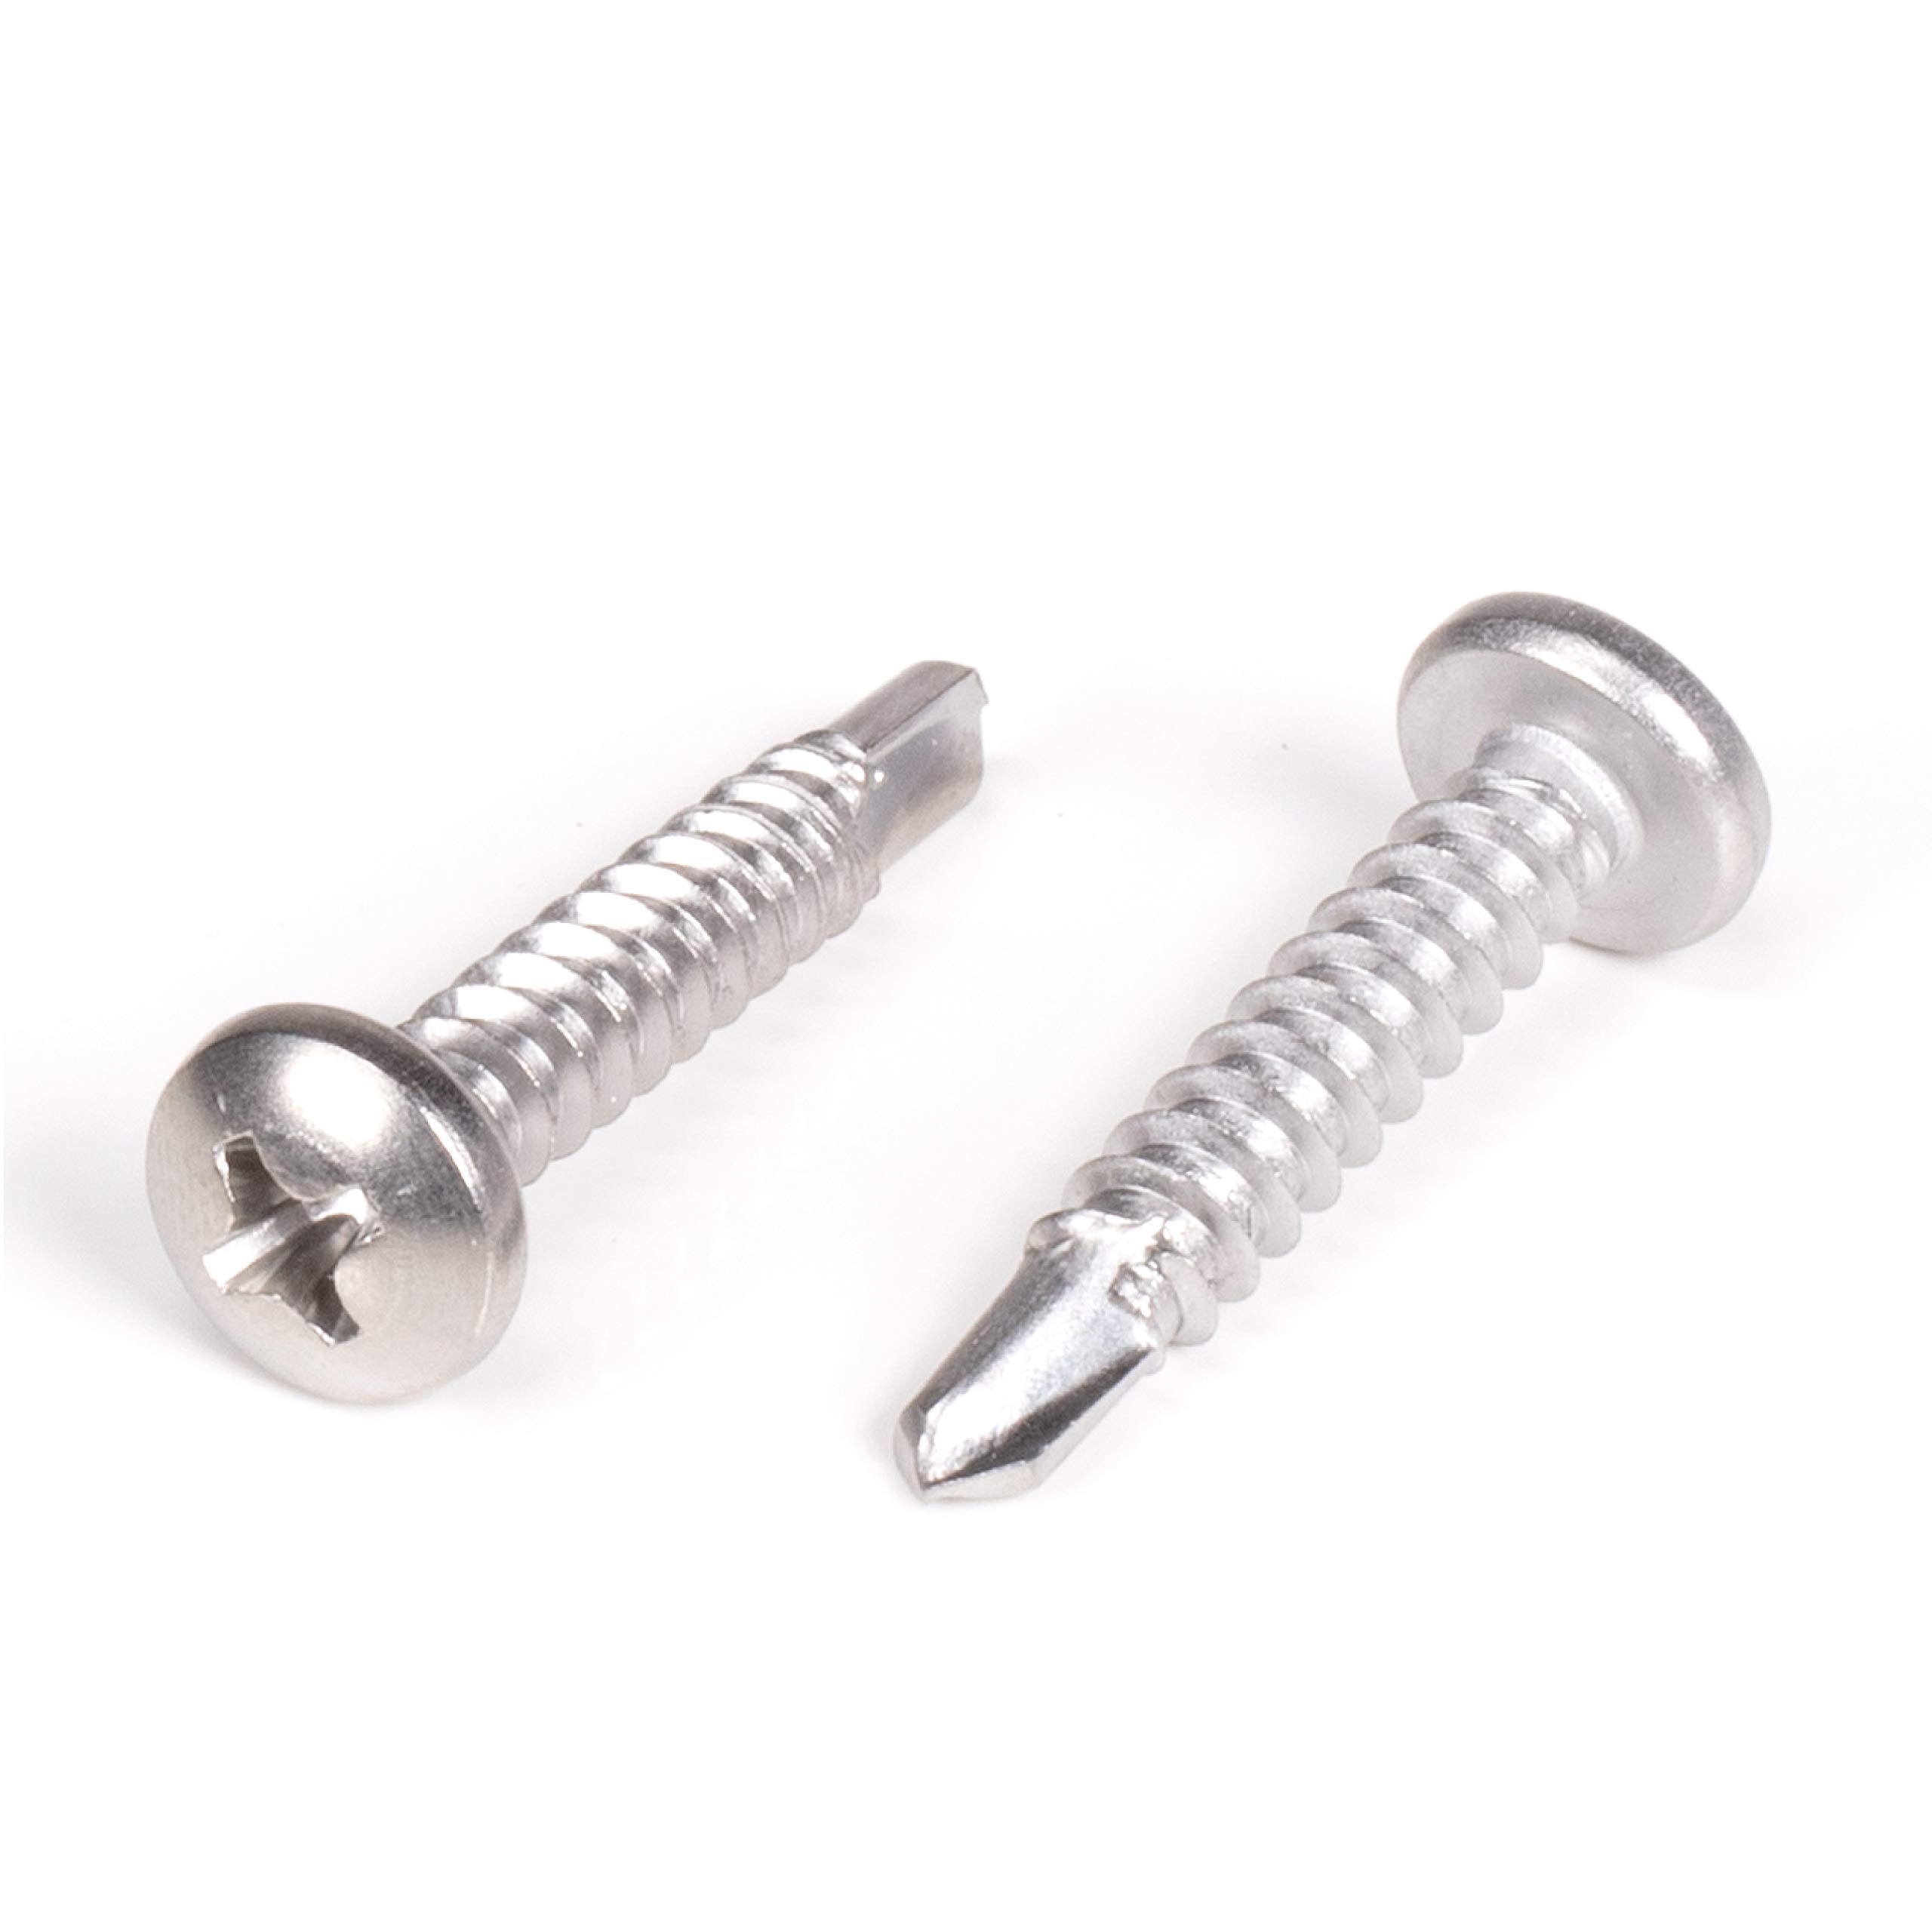 12G X 3//4/" Pozi Countersunk Self Tapping Screws Stainless DIN 7982-50PK